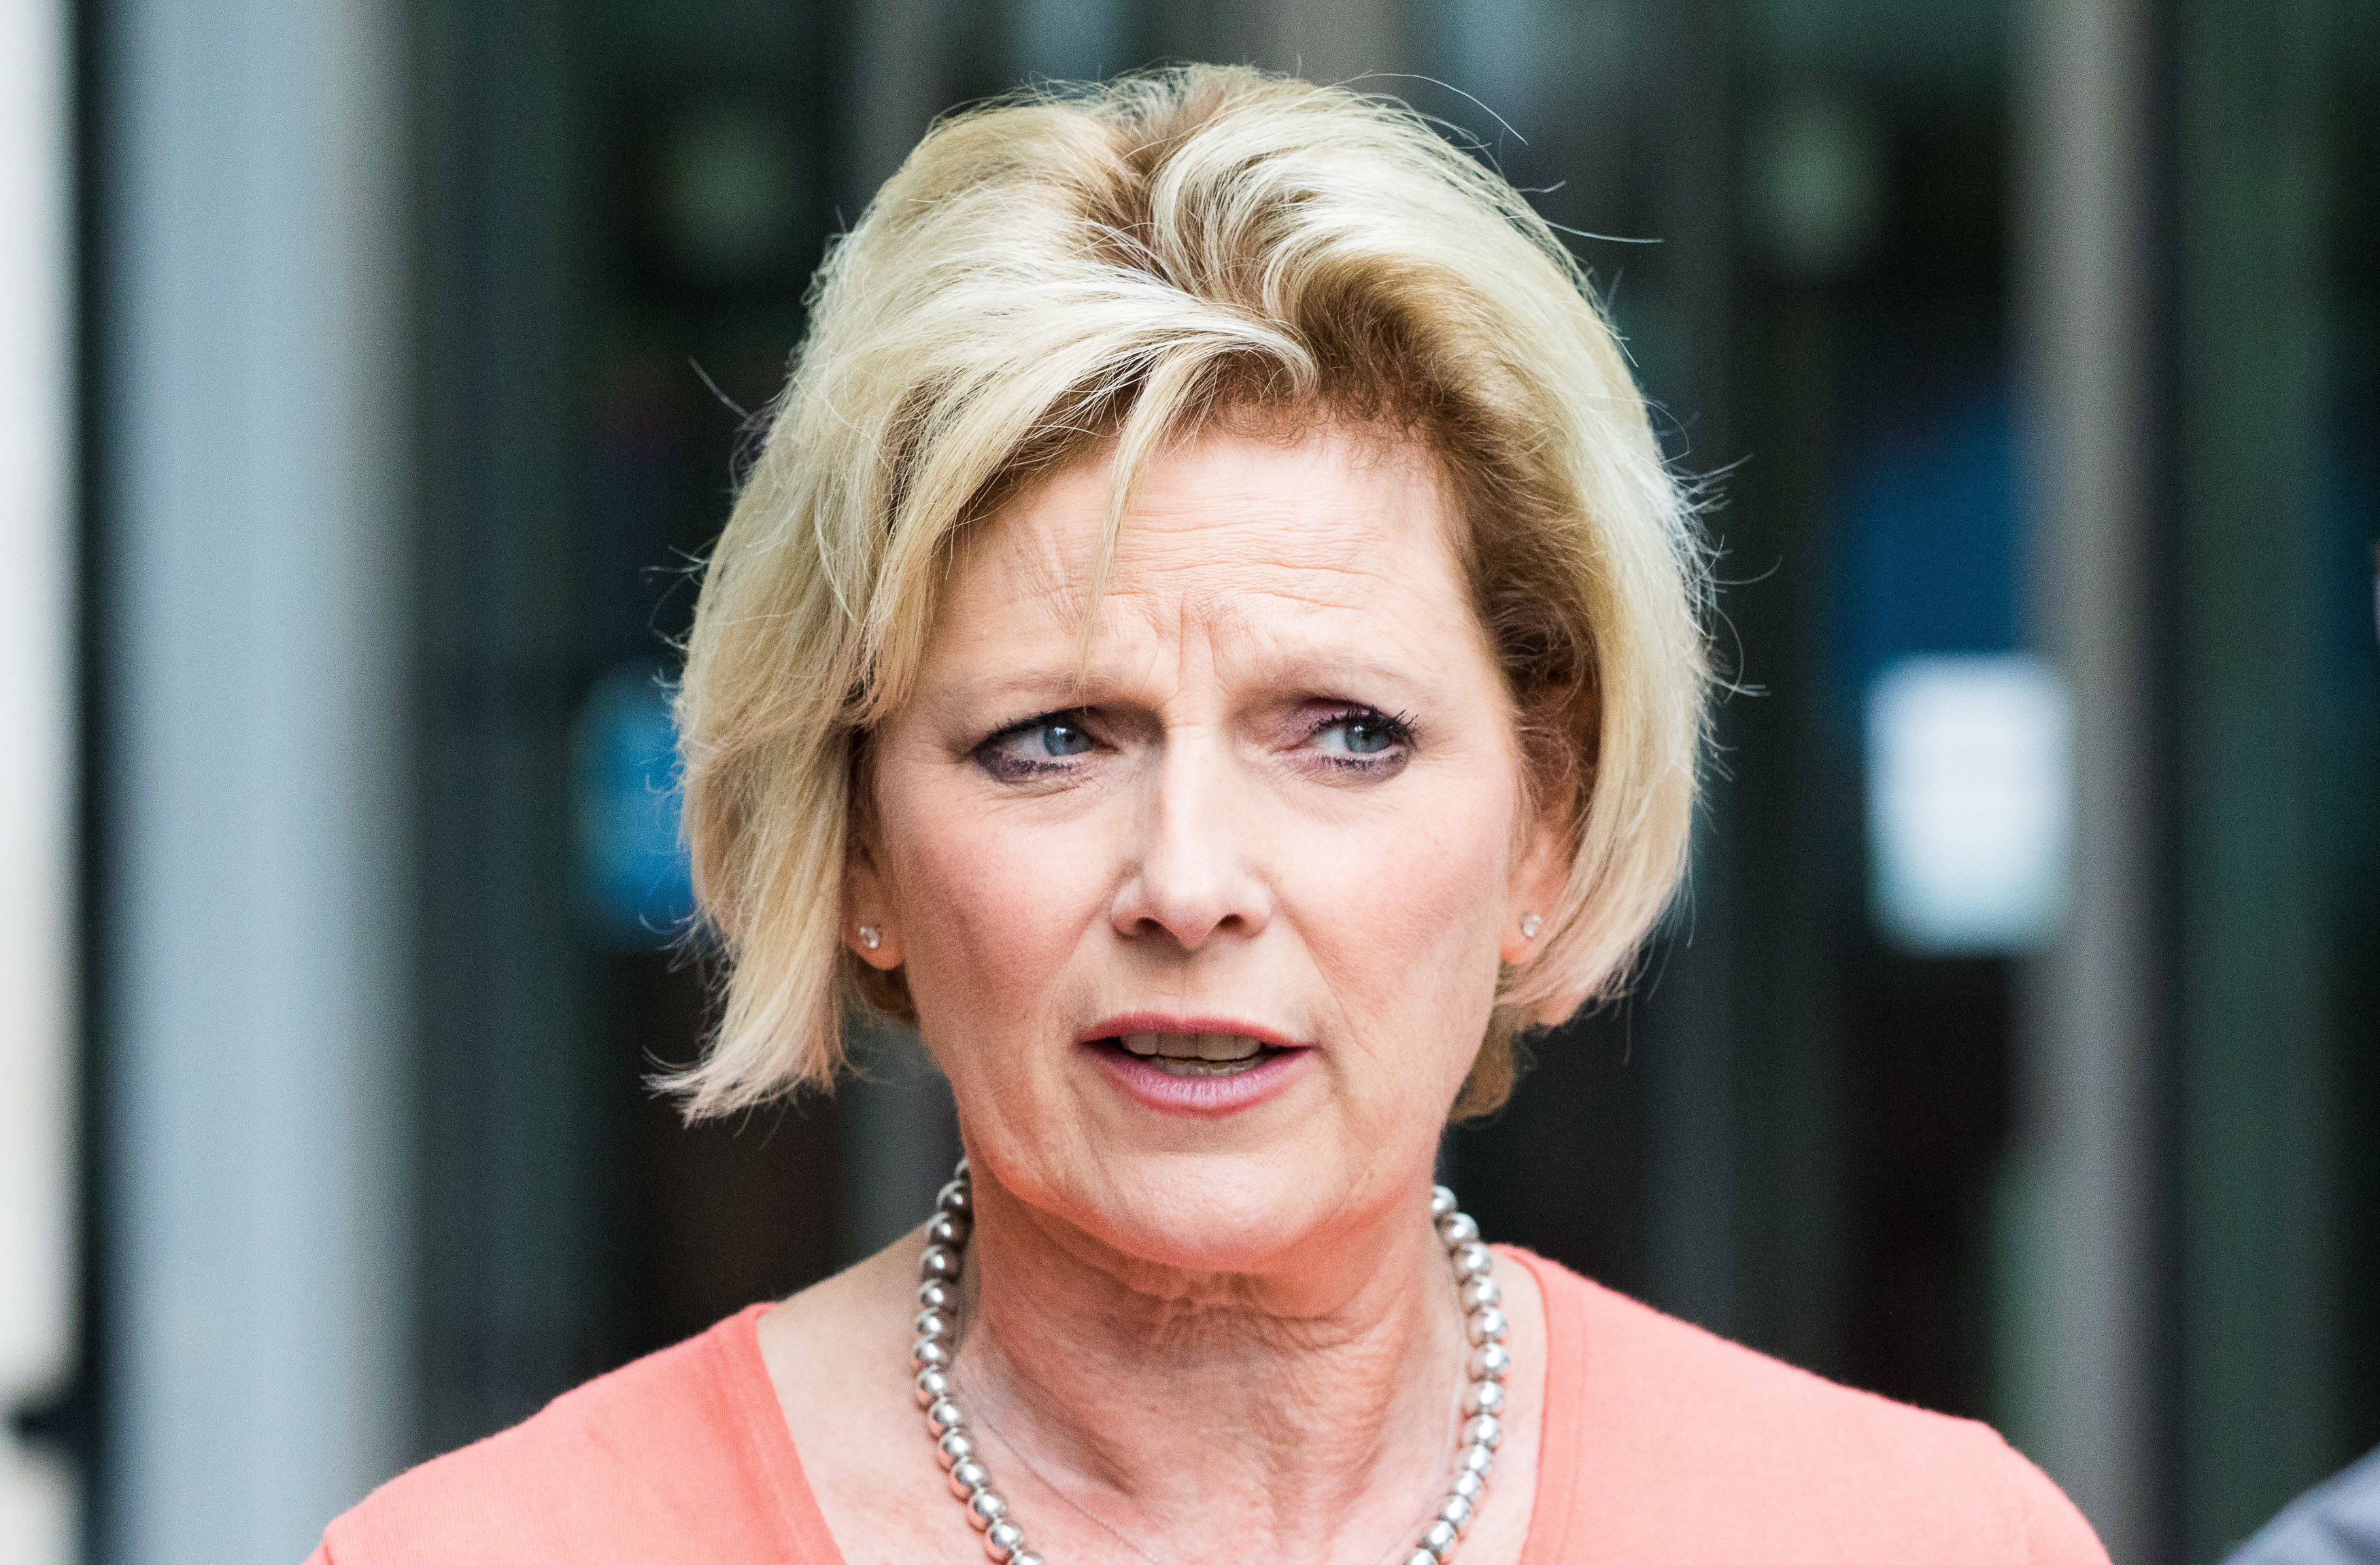 Conservative MP Anna Soubry has received threats over her Brexit stance